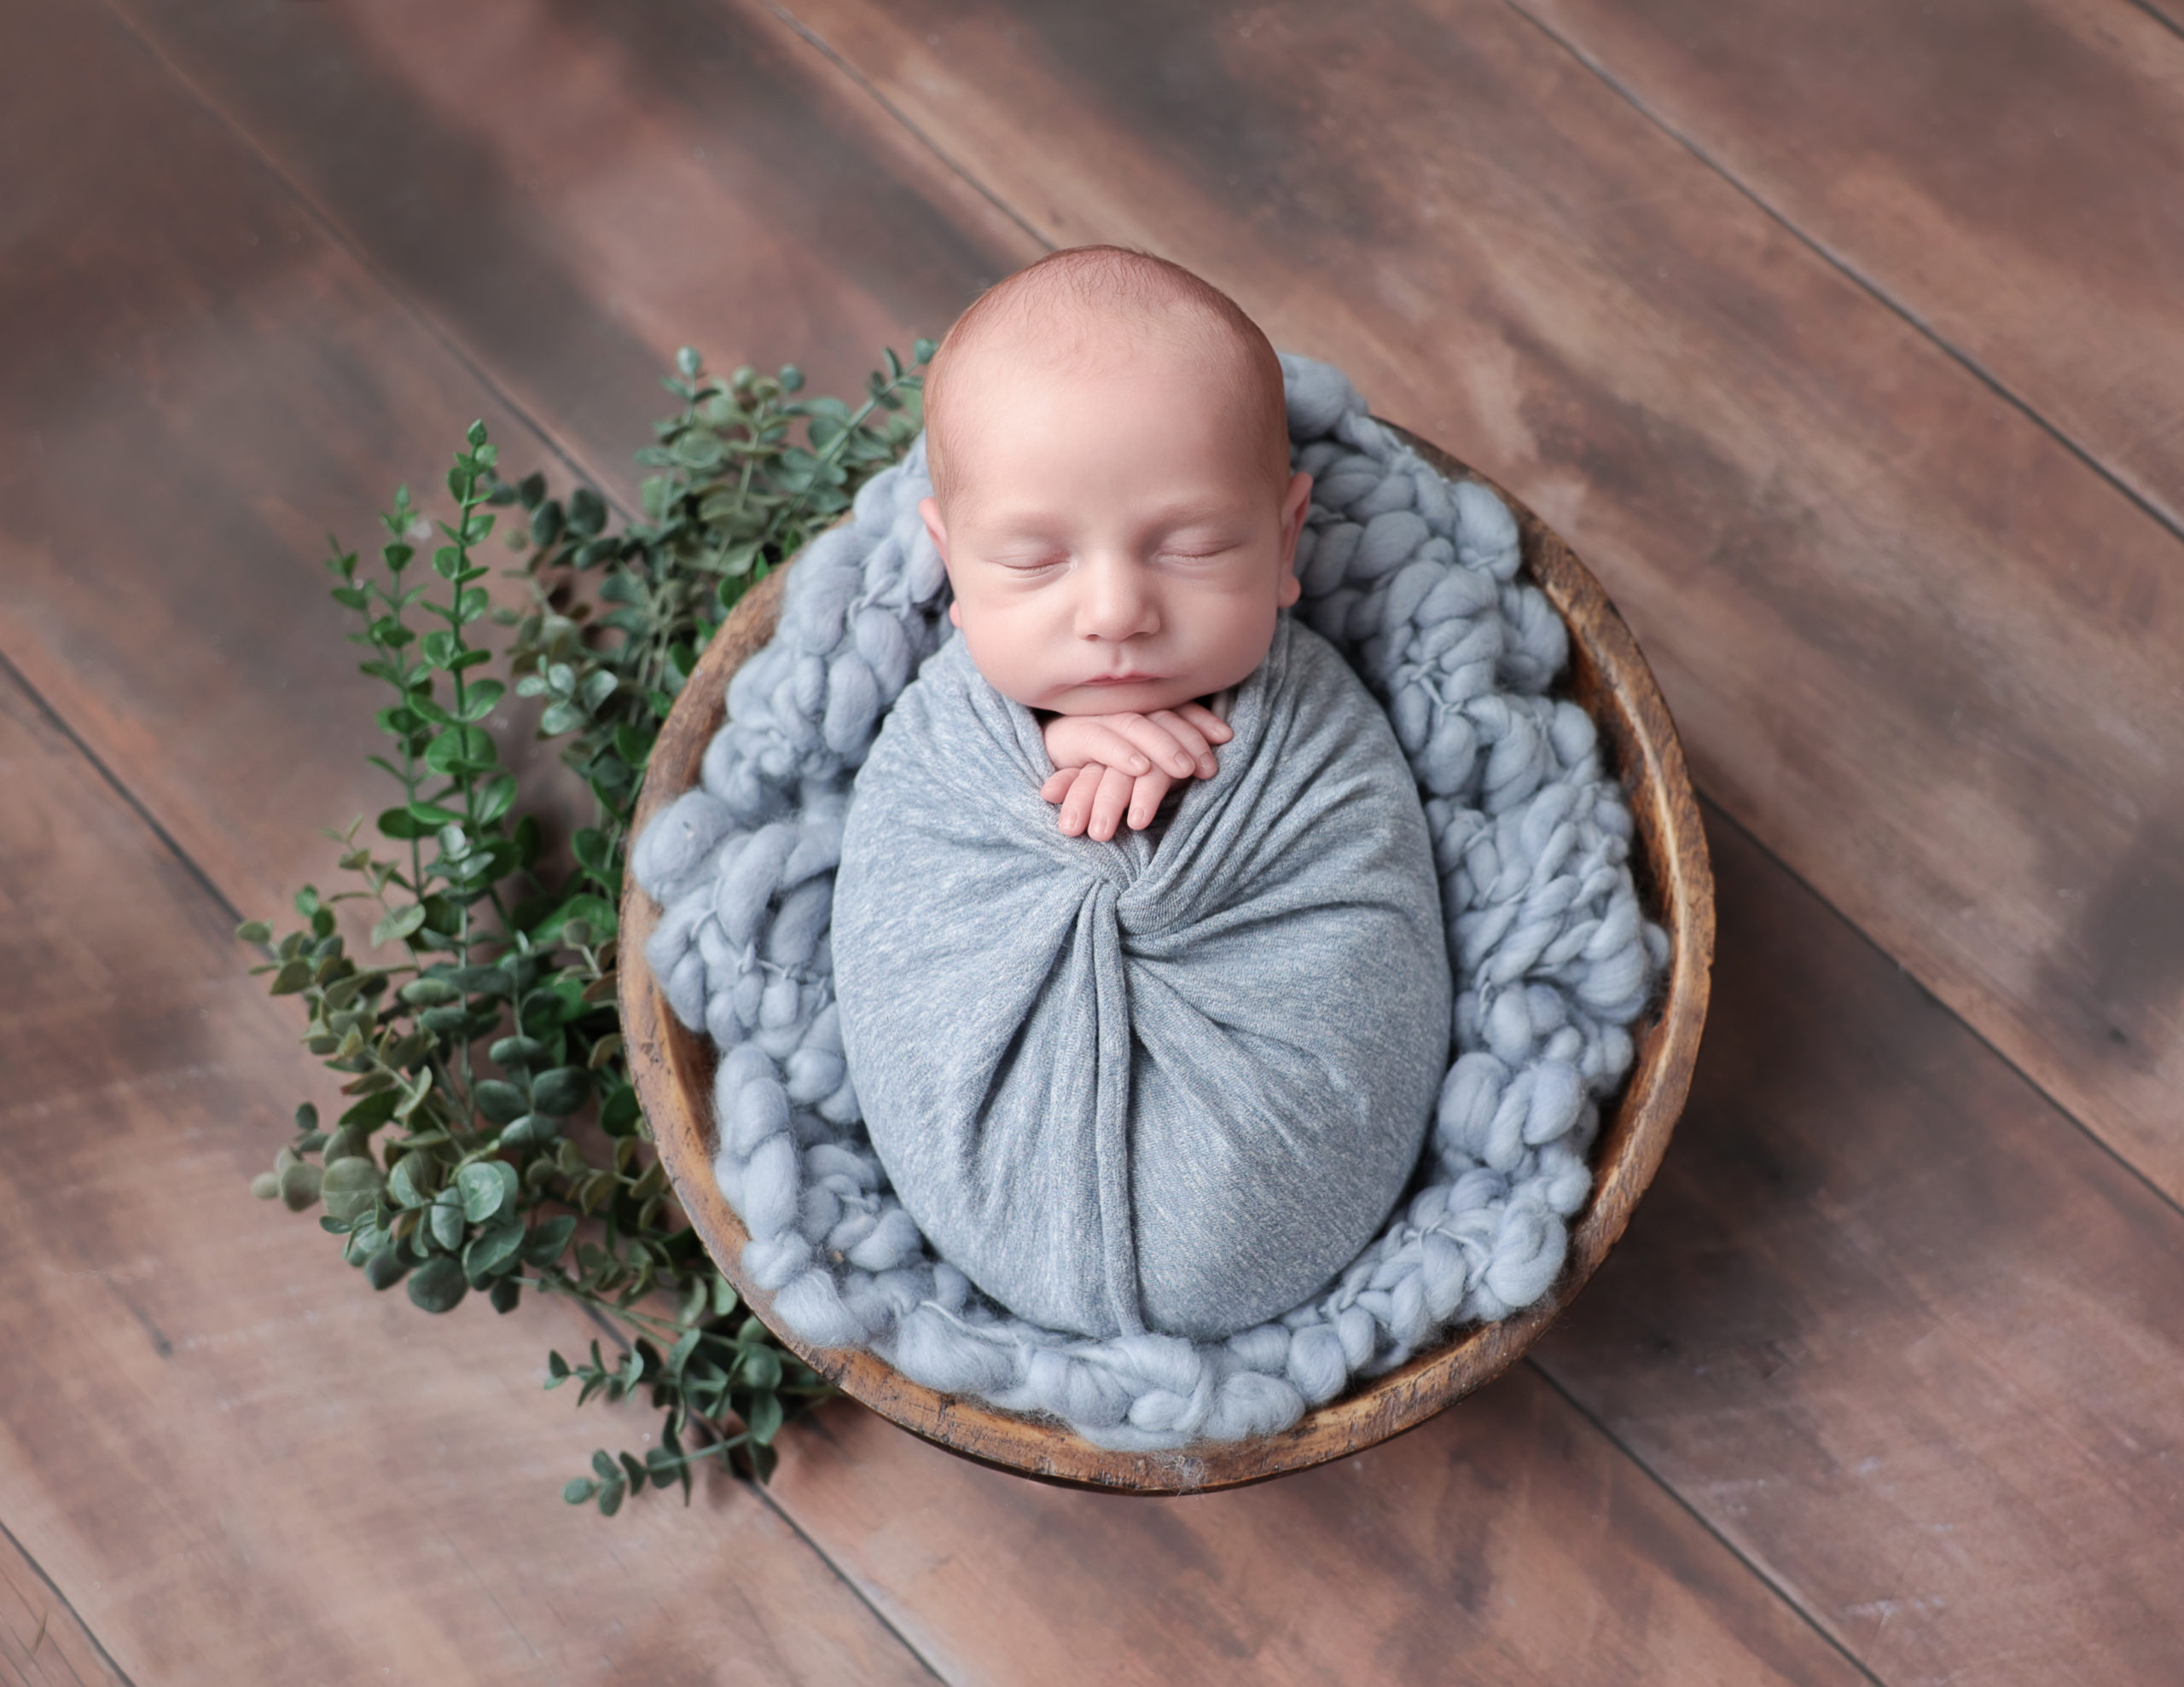 Sleeping baby boy posed in wooden bowl in our Rochester, NY studio.